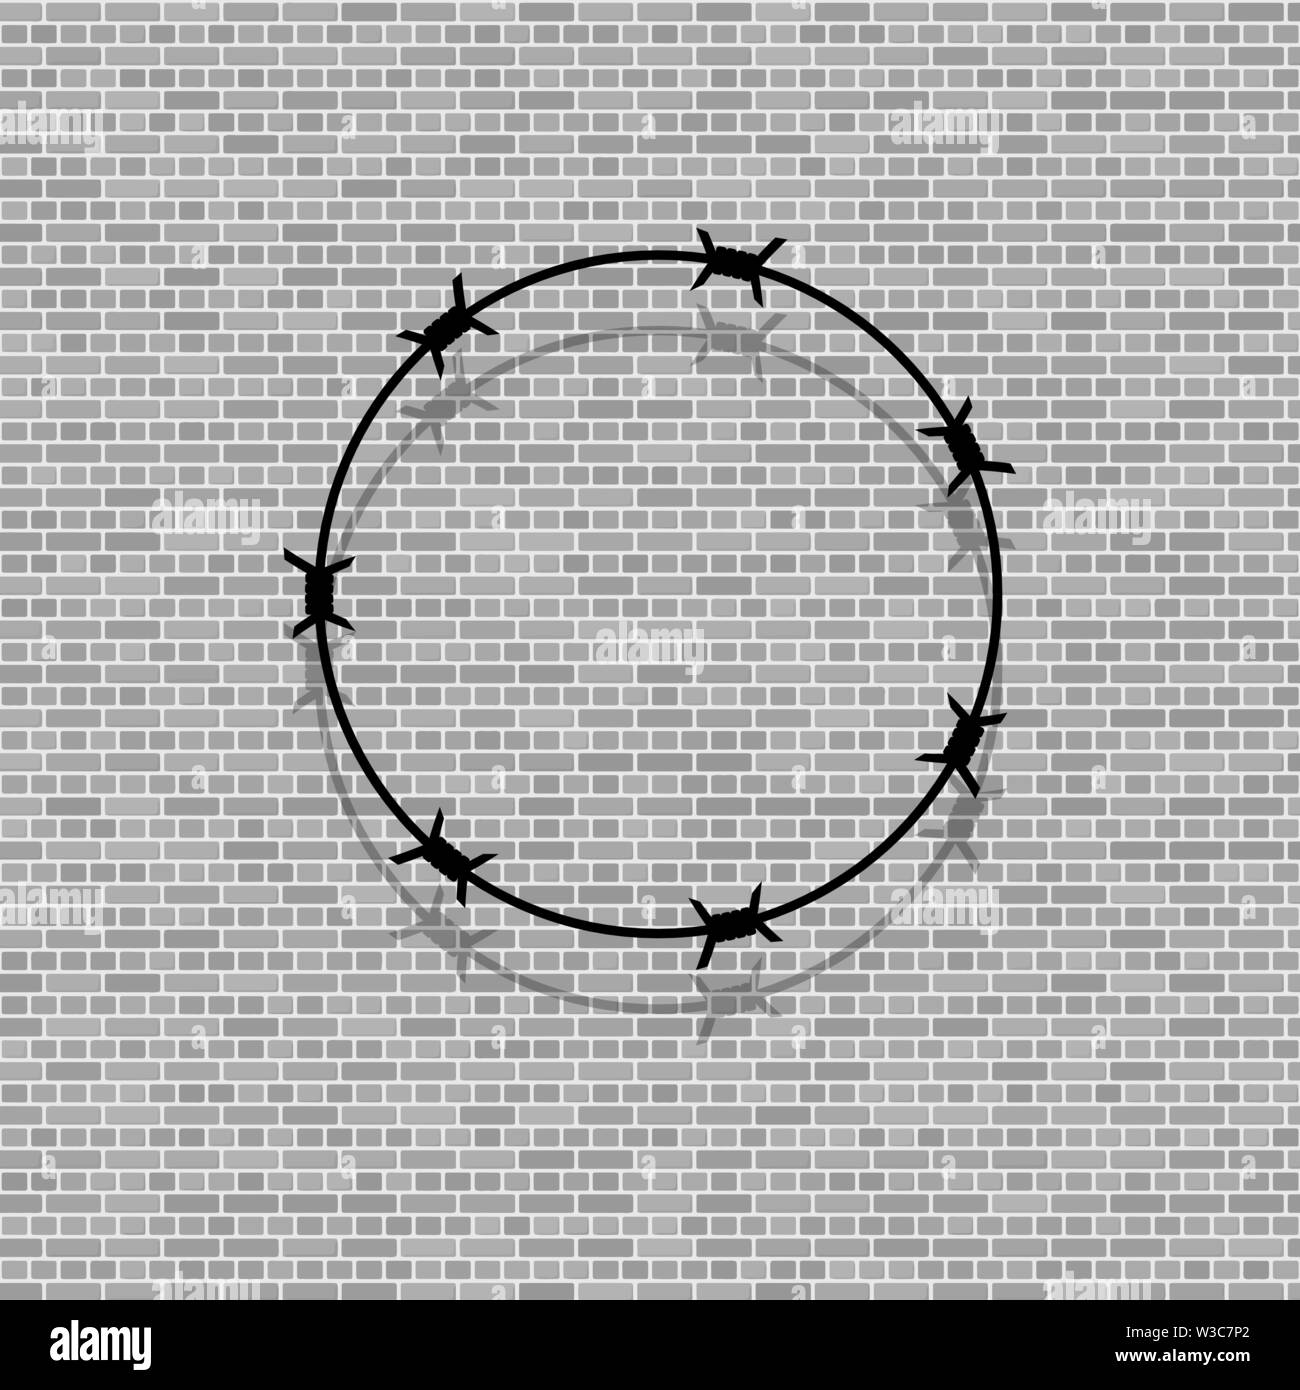 Barbed Wire Circle on Grey Brick Background. Stylized Prison Concept. Symbol of Not Freedom. Metal Frame Round Stock Vector